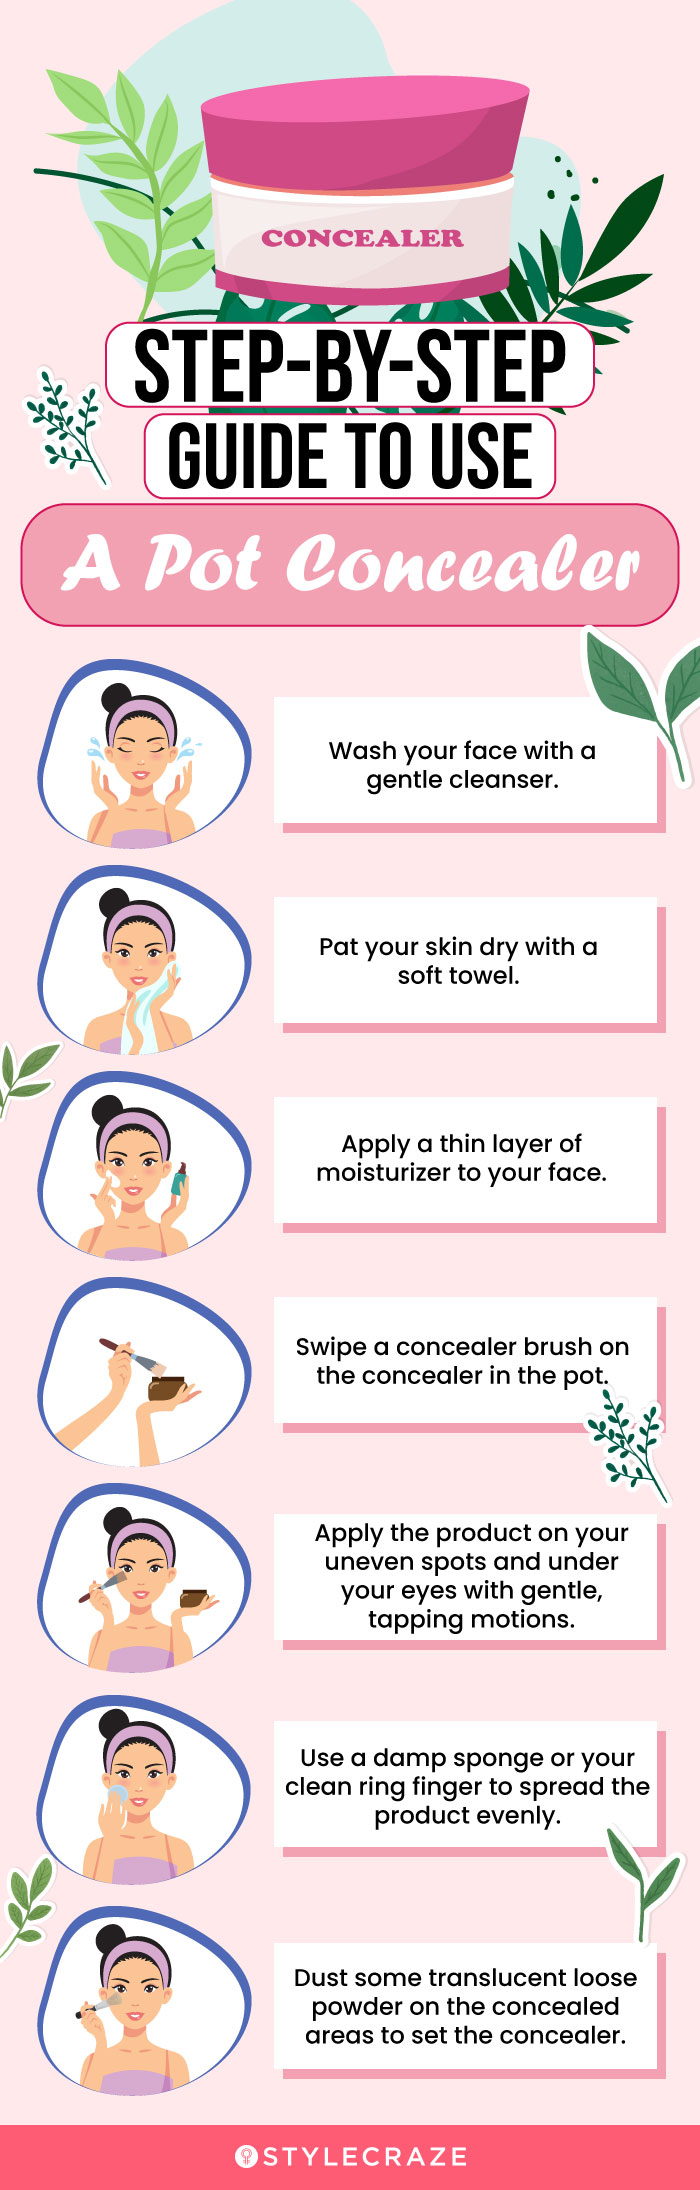 Step-By-Step Guide To Use A Pot Concealer (infographic)